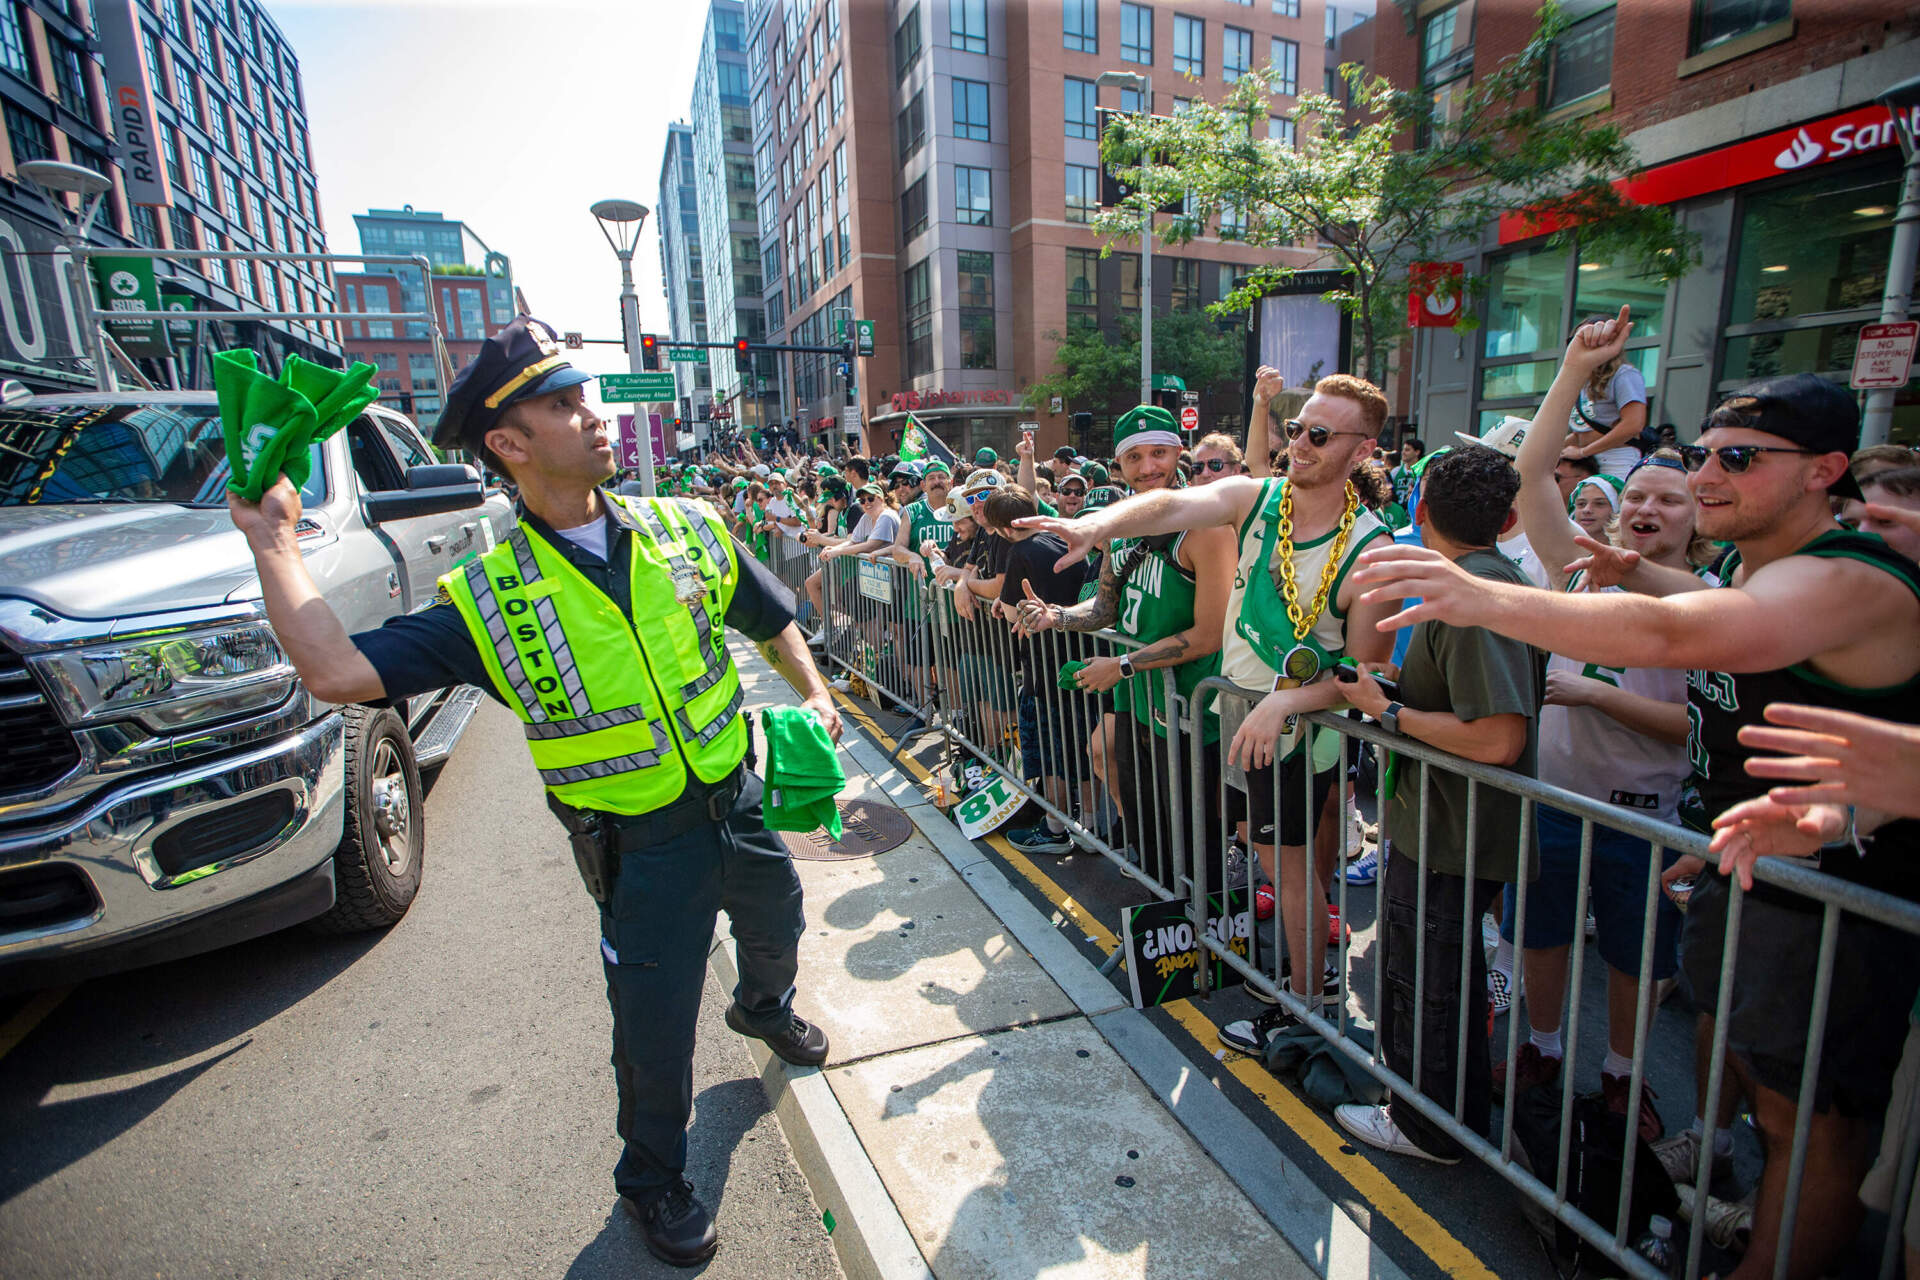 A Boston Police officer tosses Celtics towels out to the crowd waiting outside of TD Garden prior to the rolling rally. (Jesse Costa/WBUR)